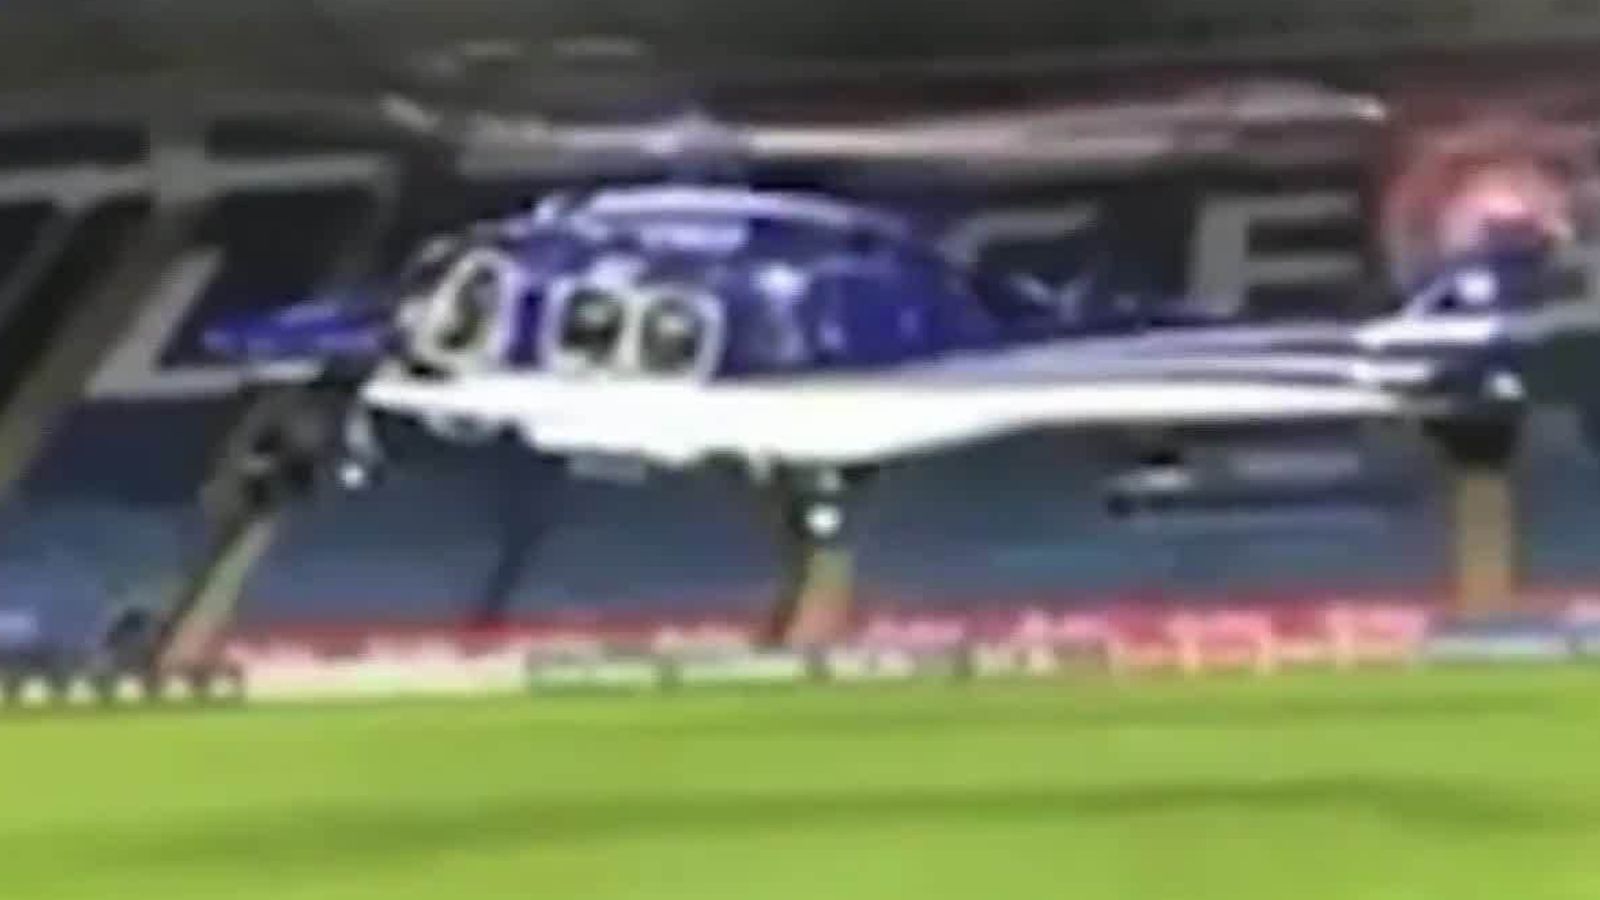 Final words of helicopter pilot before crash that killed Leicester City owner revealed in official report